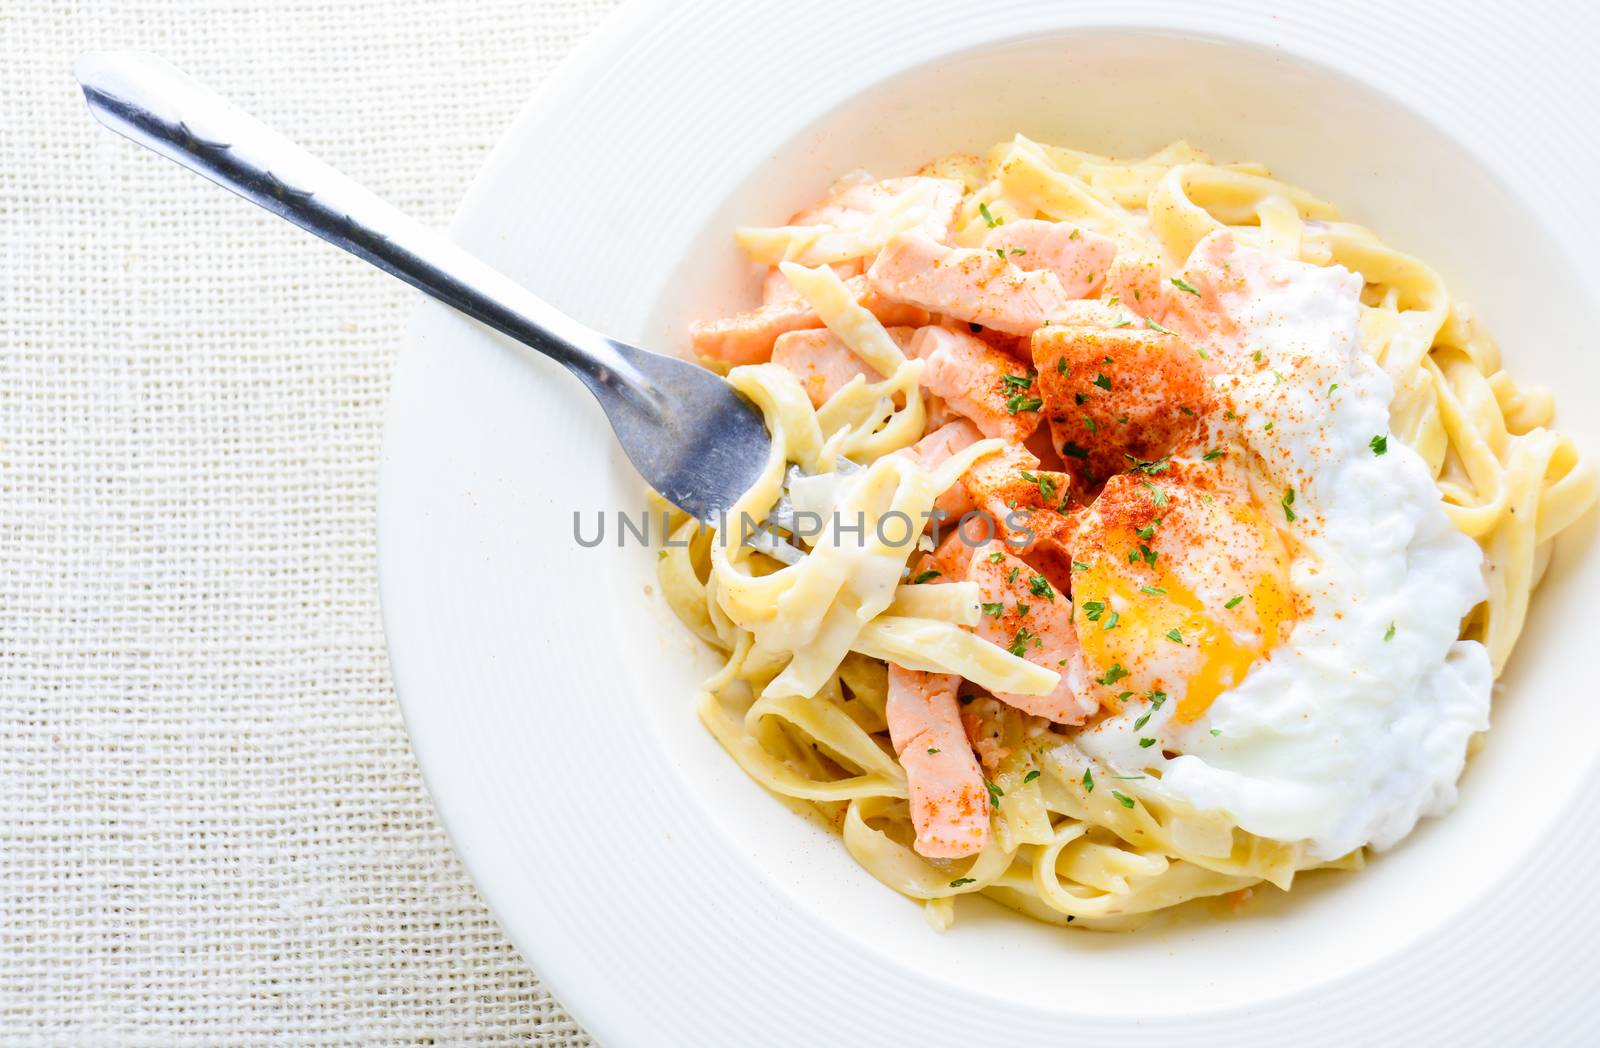 Fettucine with salmon, egg and parmesan cheese, served on white plate.
